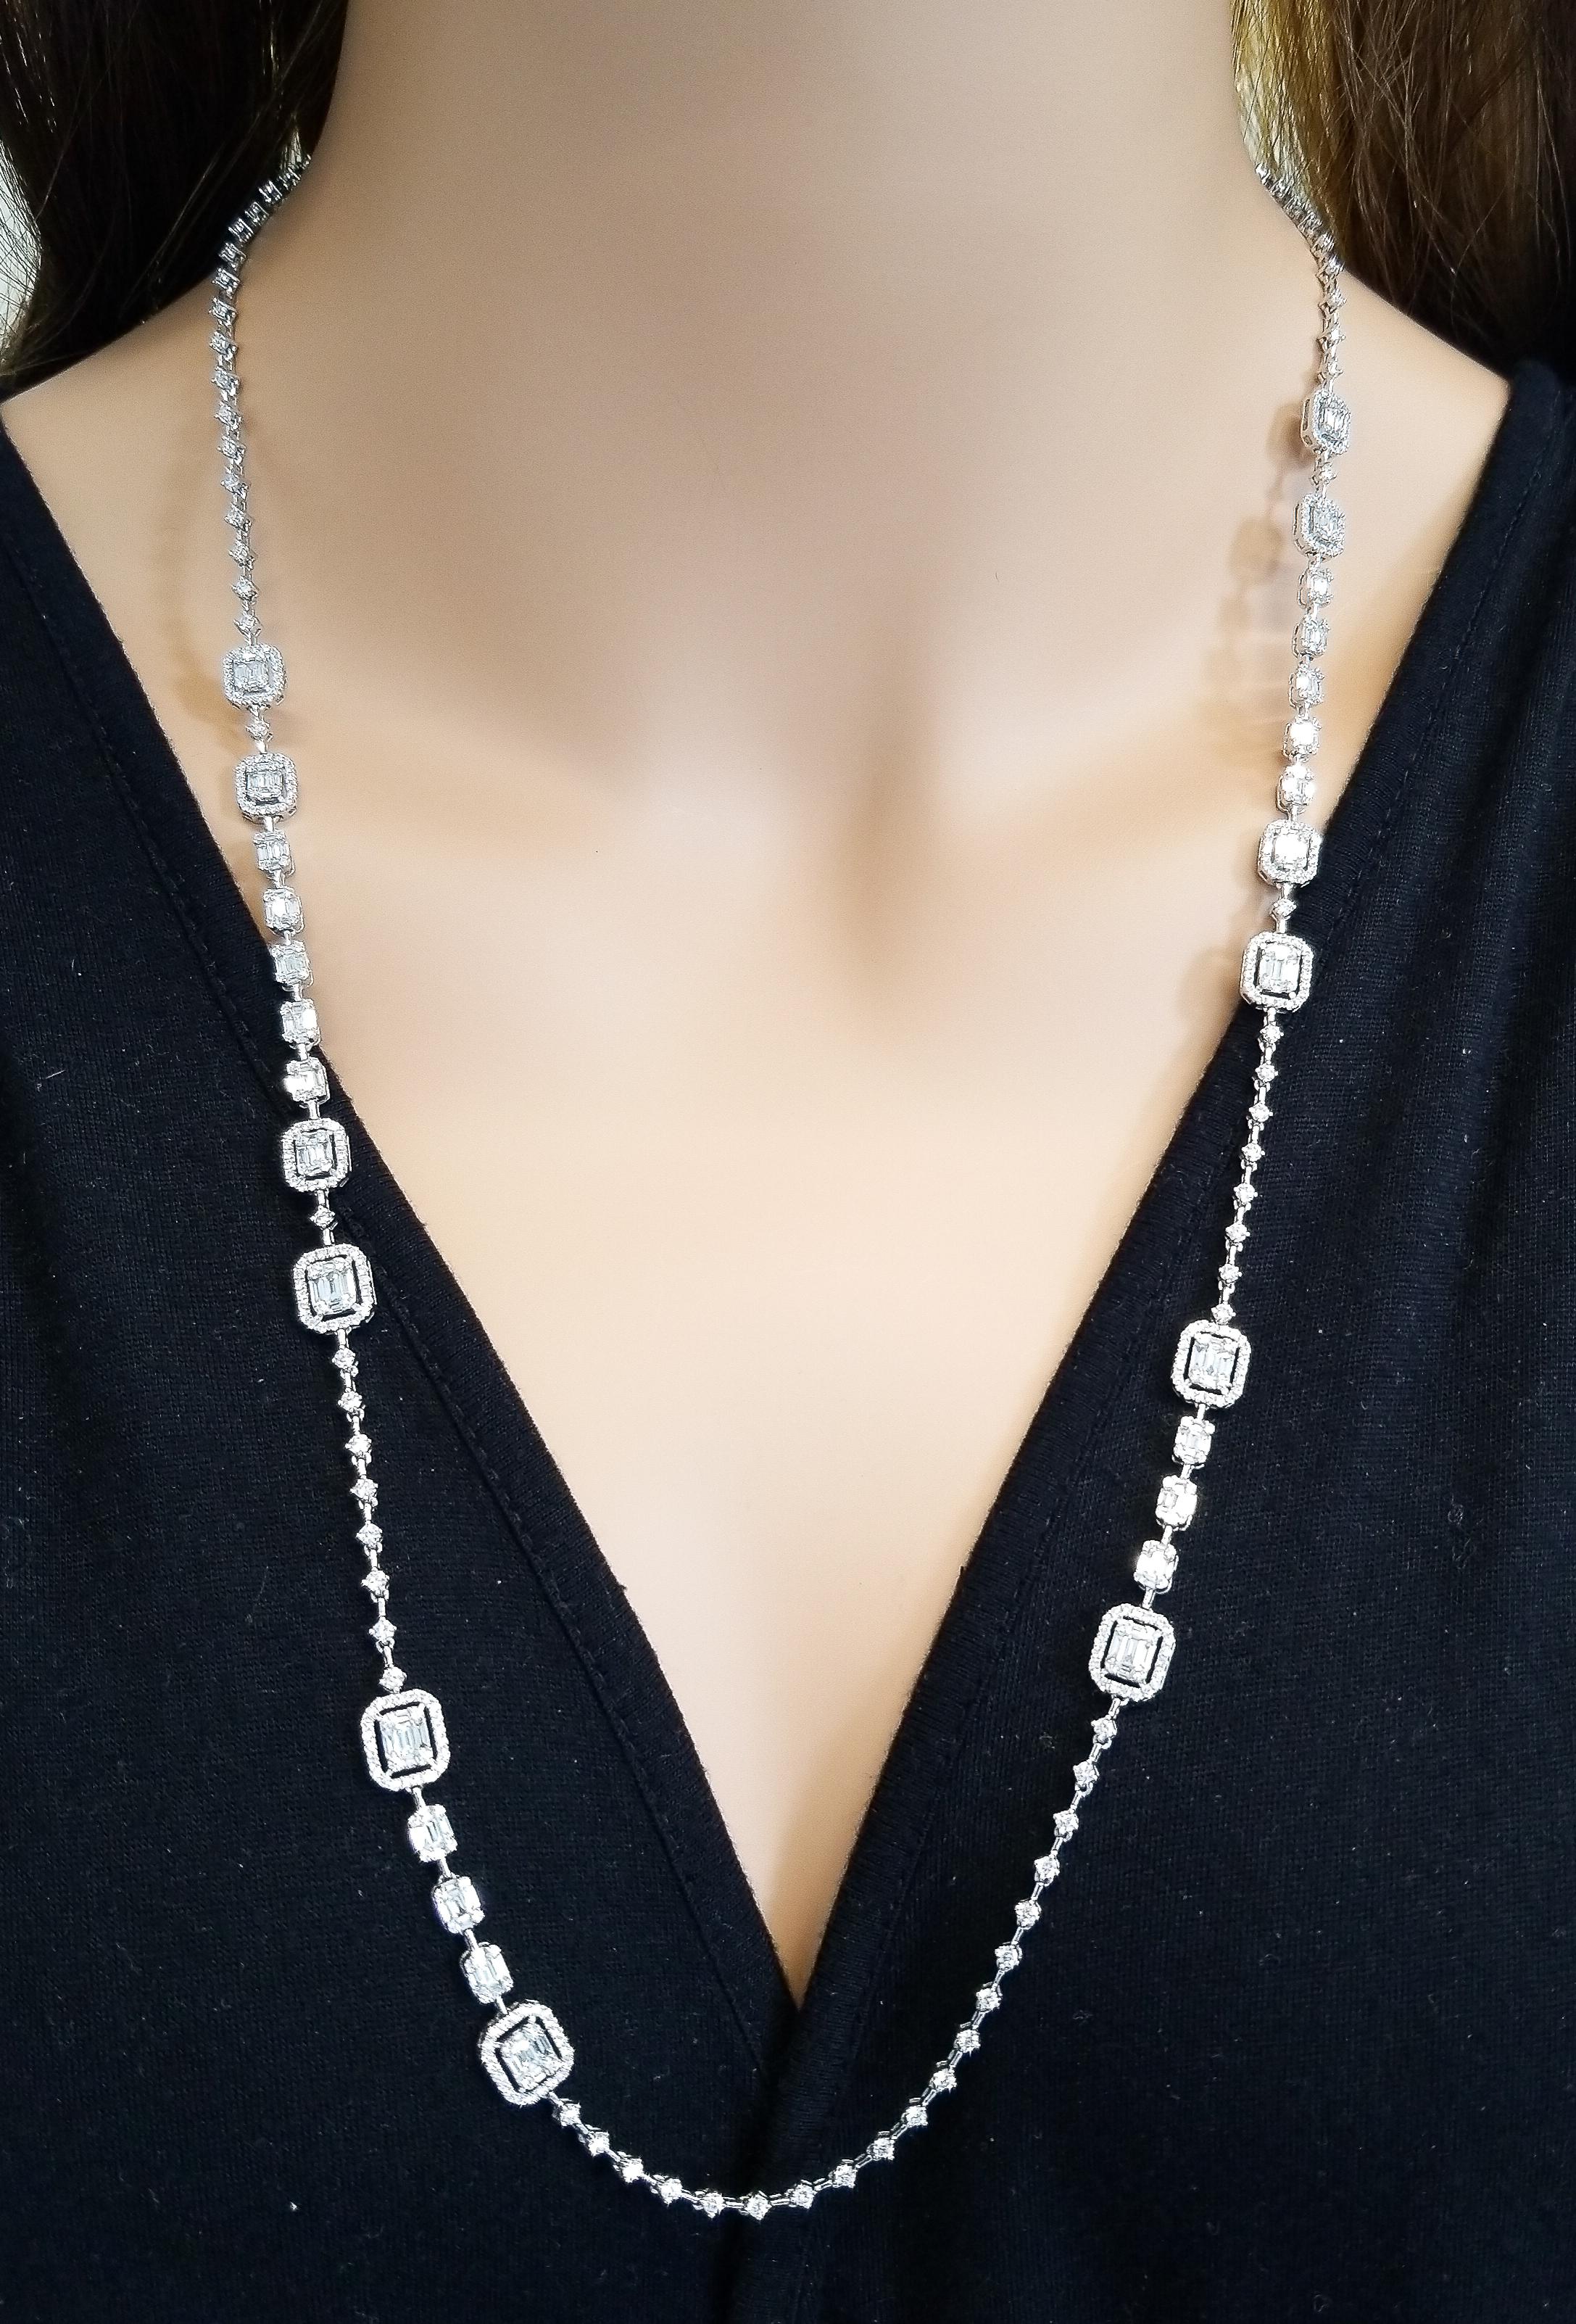 This art deco style necklace will make heads turn with its forward design. Round brilliant cut diamonds adorn this necklace from end to end in an eternity setting.  These prong set diamonds glitter in circle links that alternate with shiny linear